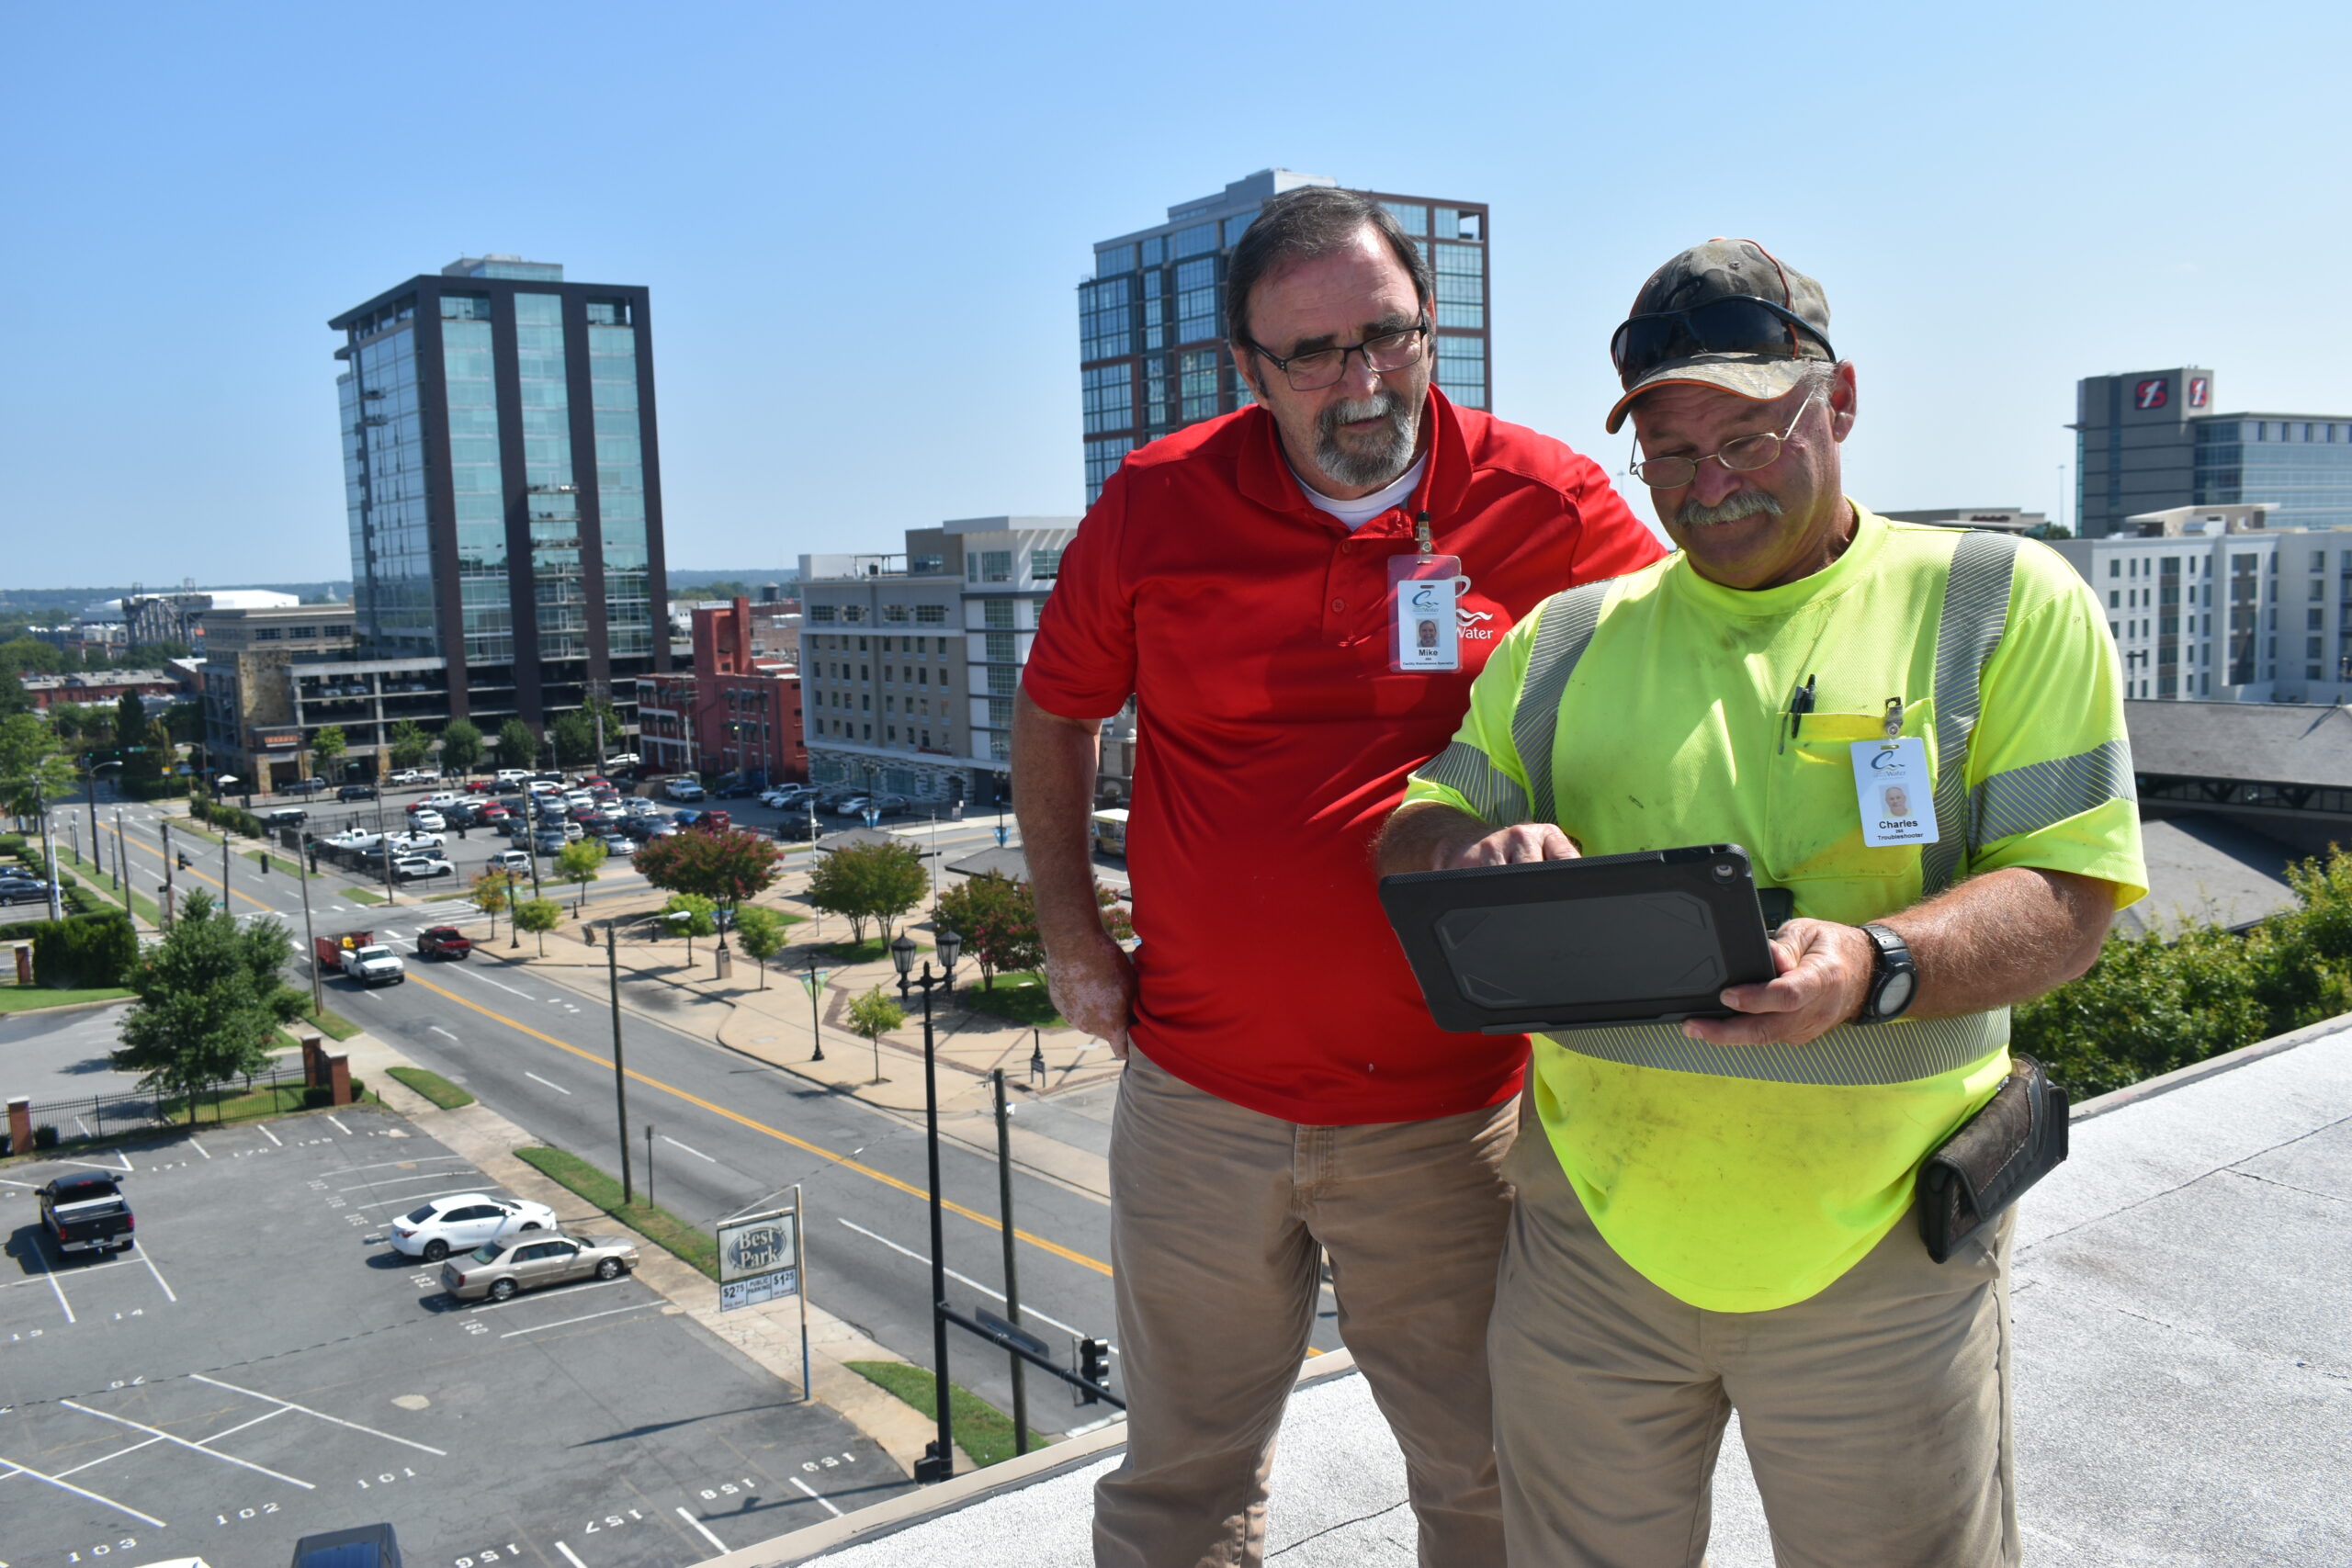 CAW on-site staff have GIS at their fingertips.